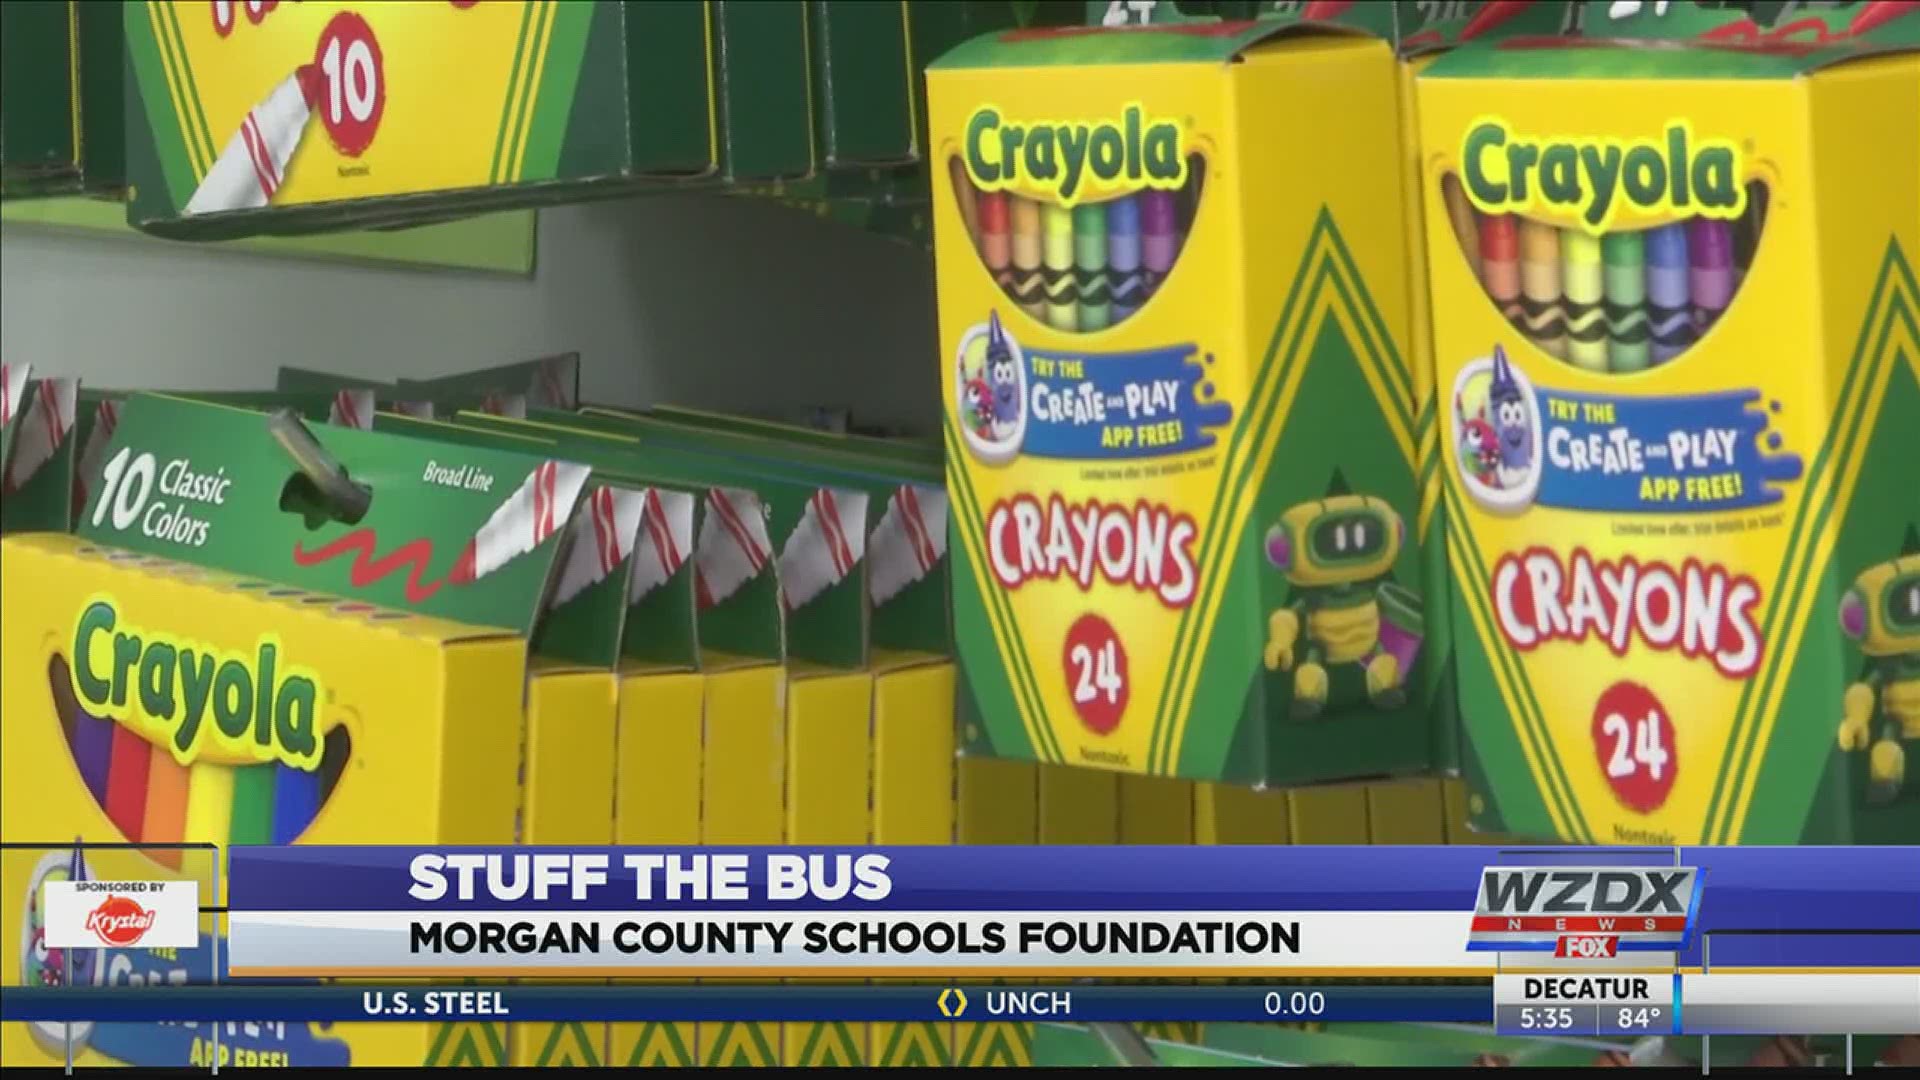 Stuff the Bus with school supplies for Morgan County Schools students.